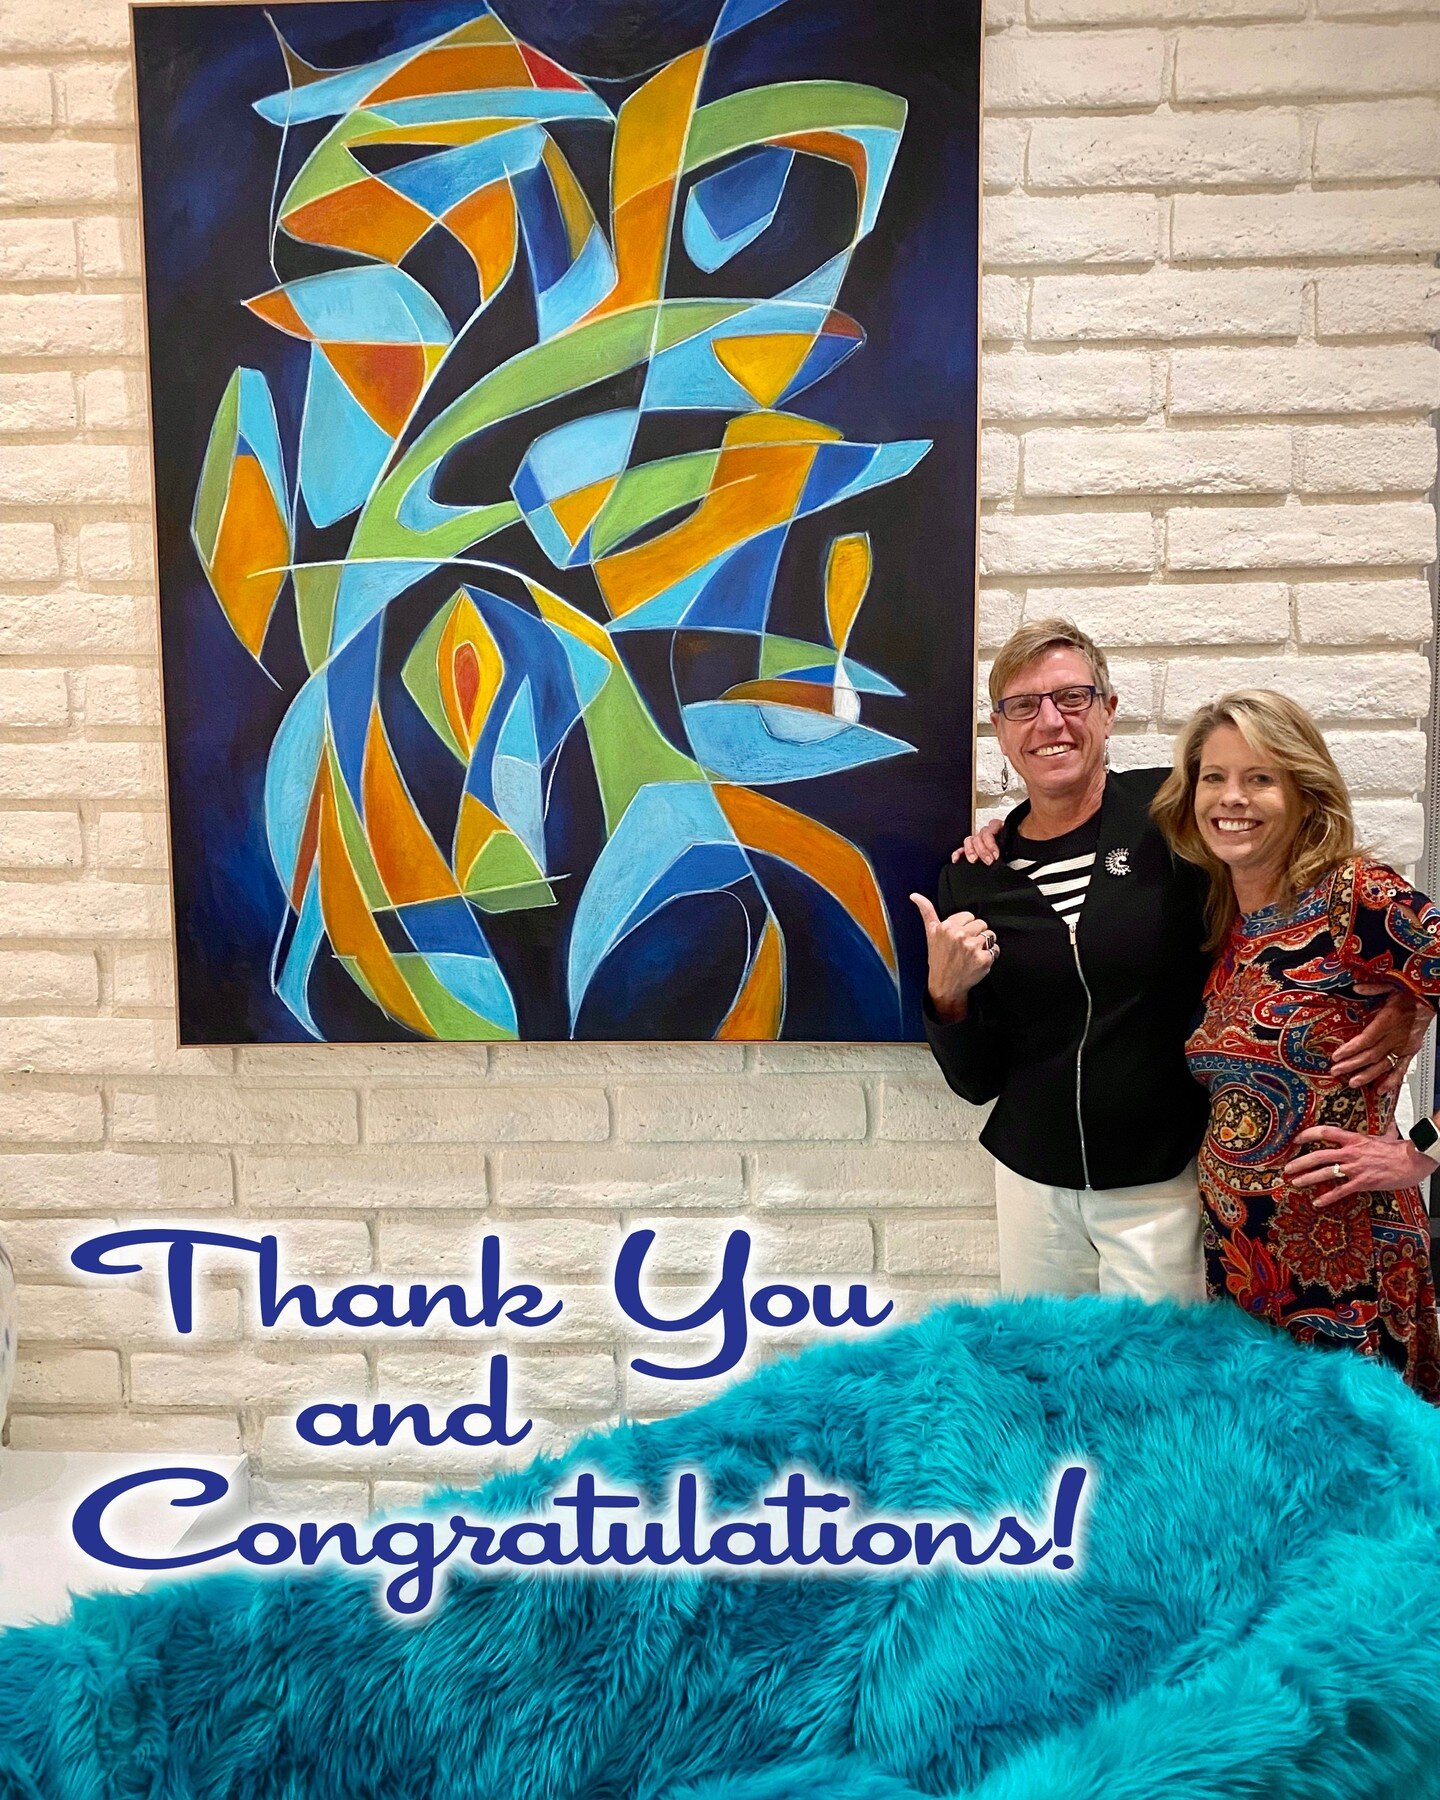 Thank you and congratulations to Gretchen and Dave (Grethen pictured with their great friend Patricia) on their acquisition of my painting, Grenouille au Vin d&rsquo;Orange! My painting is lucky enough to be living in the iconic Knott&rsquo;s Berry F